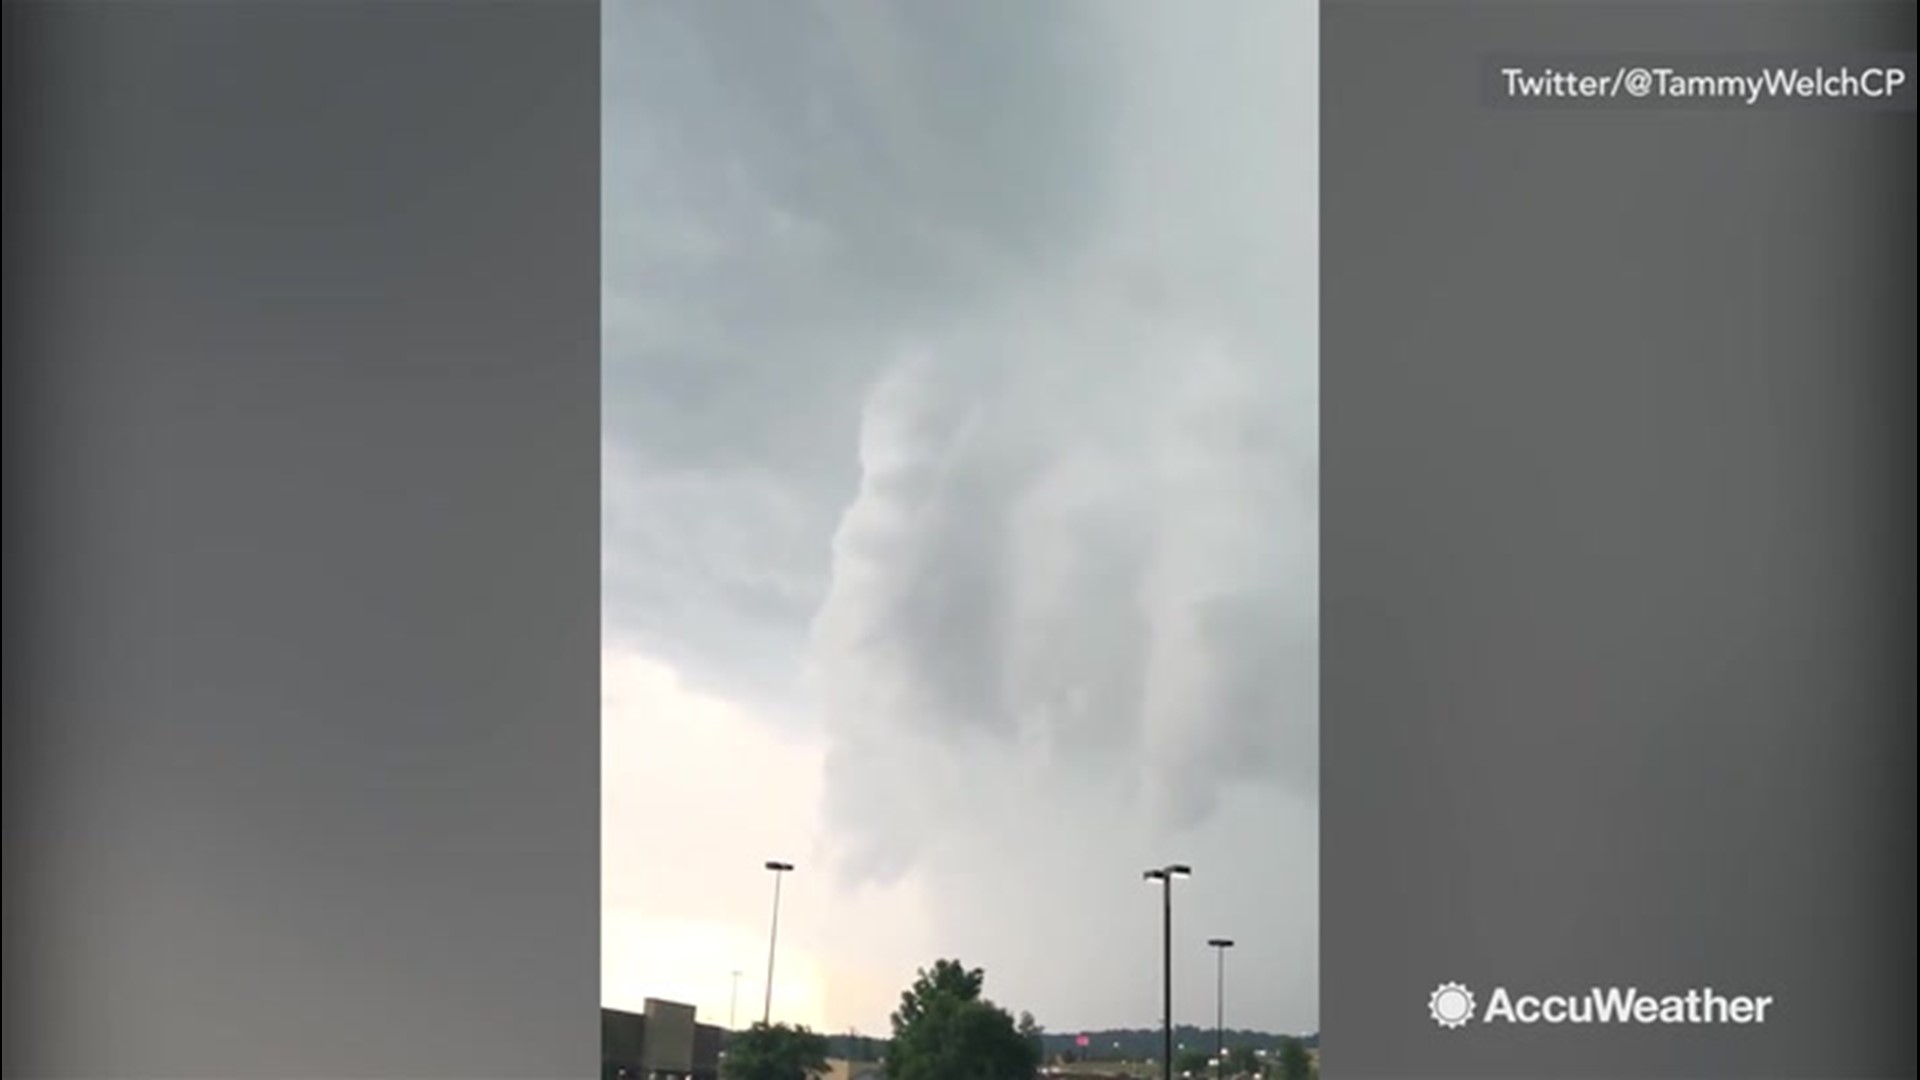 A tornado hit the Southridge area of Charleston, West Virginia the evening of Monday, June 24.